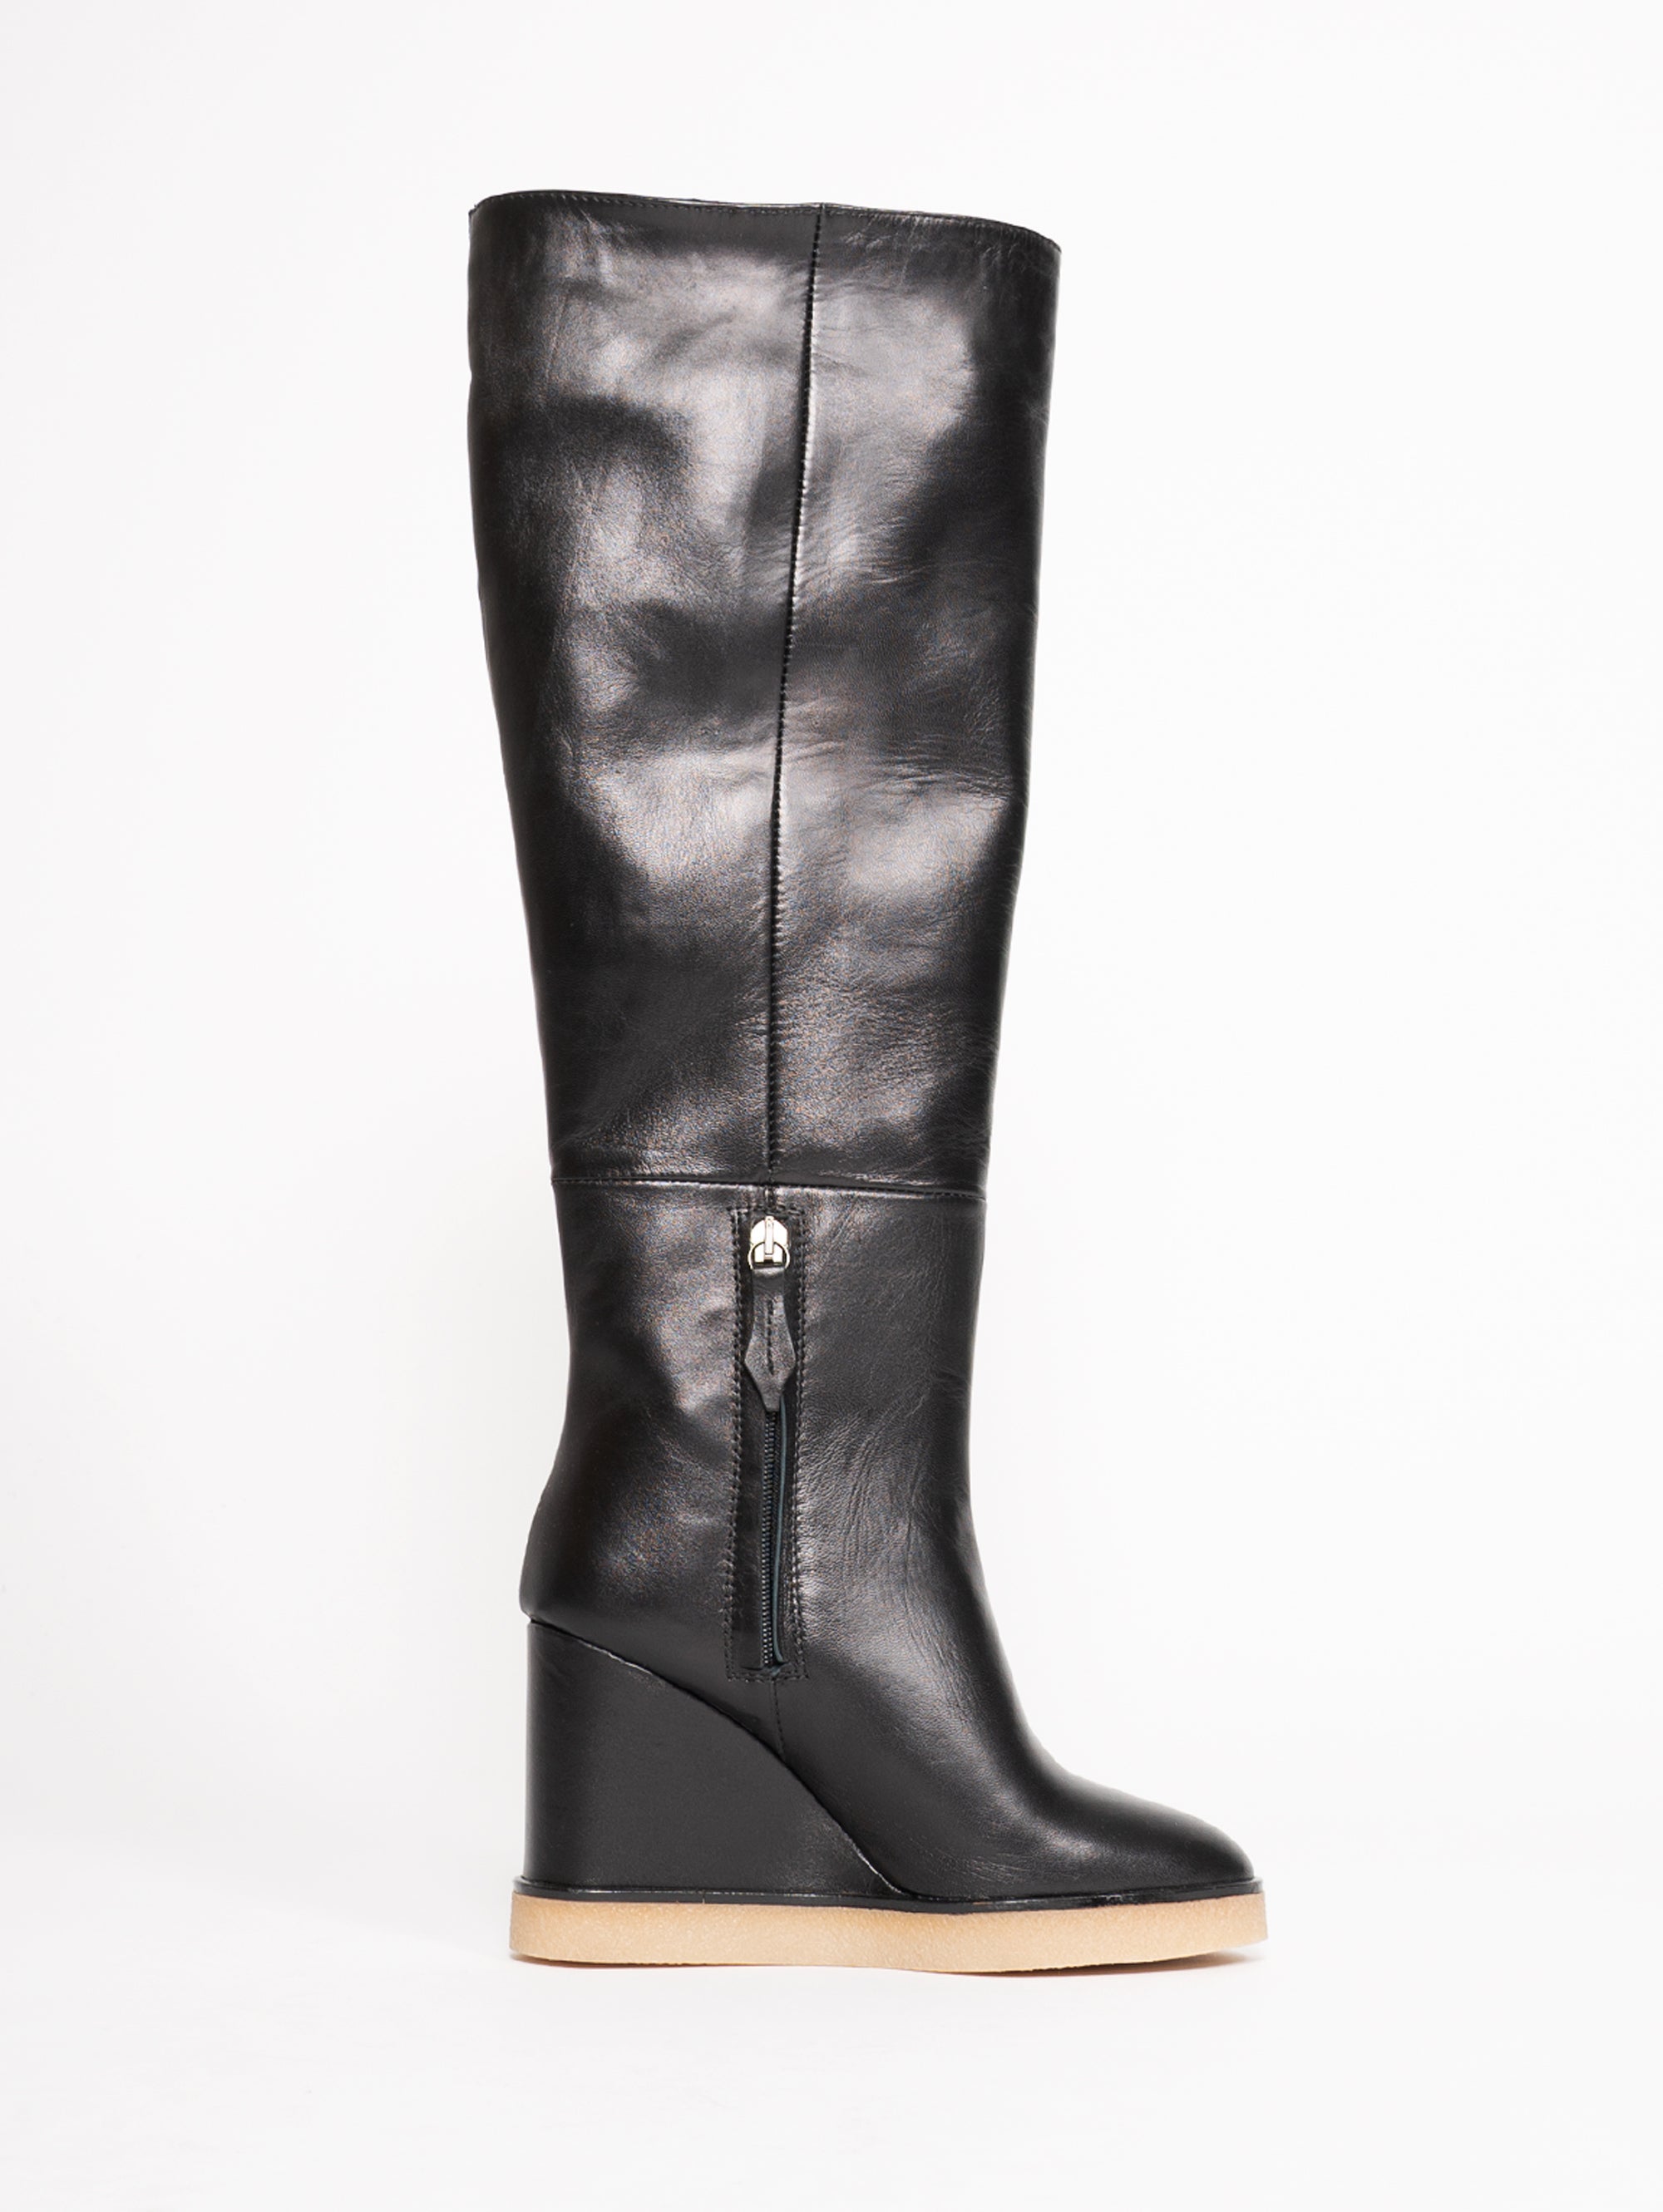 High Boots with Para and Black Wedge